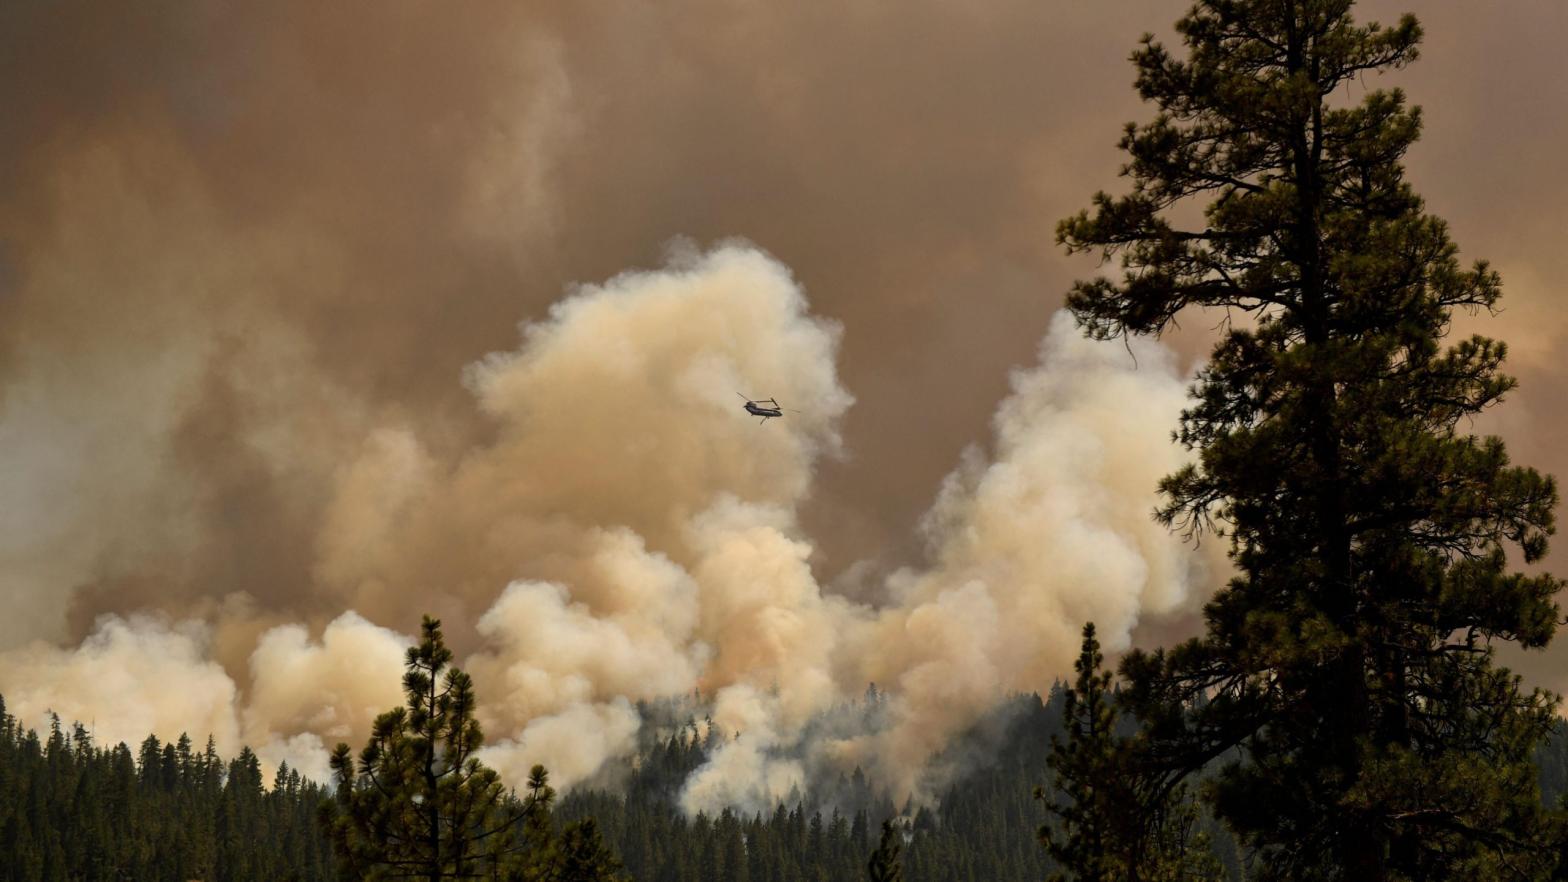 A firefighting helicopter flies past smoke plumes after making a water drop during the Dixie Fire. (Photo: Patrick T. Fallon/AFP, Getty Images)